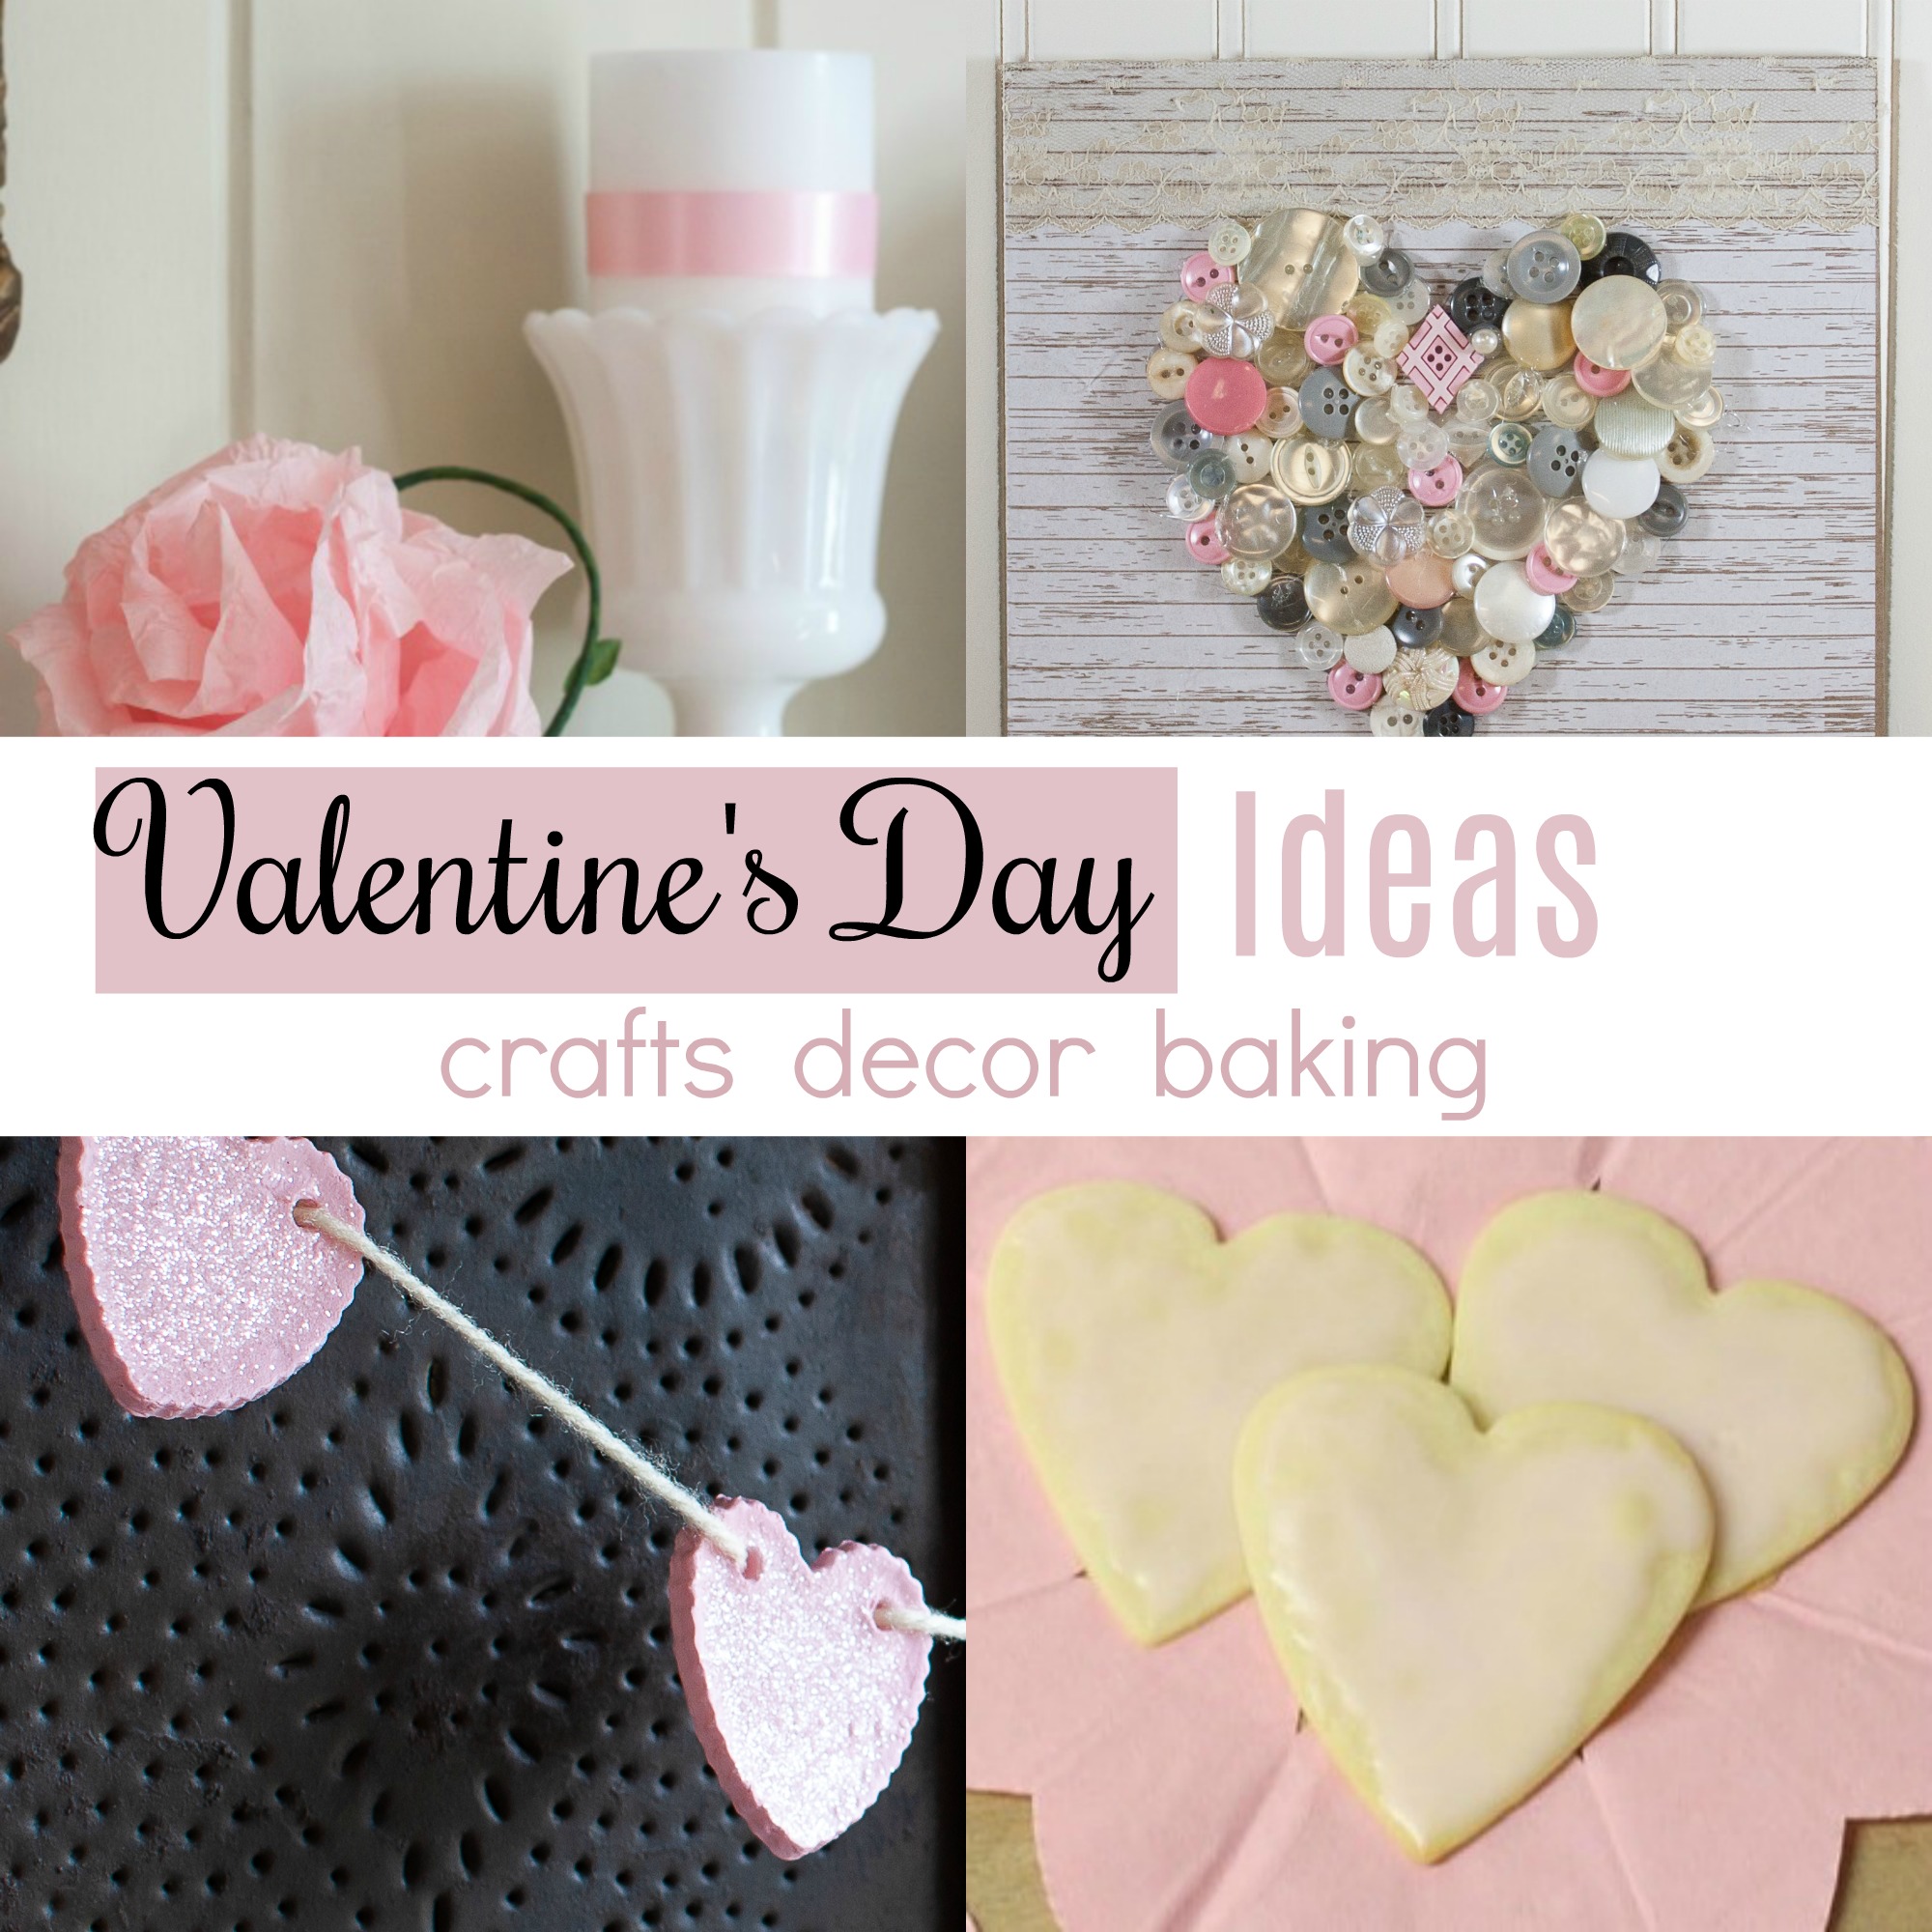 Valentine's Day Ideas for crafts, decor, and baking